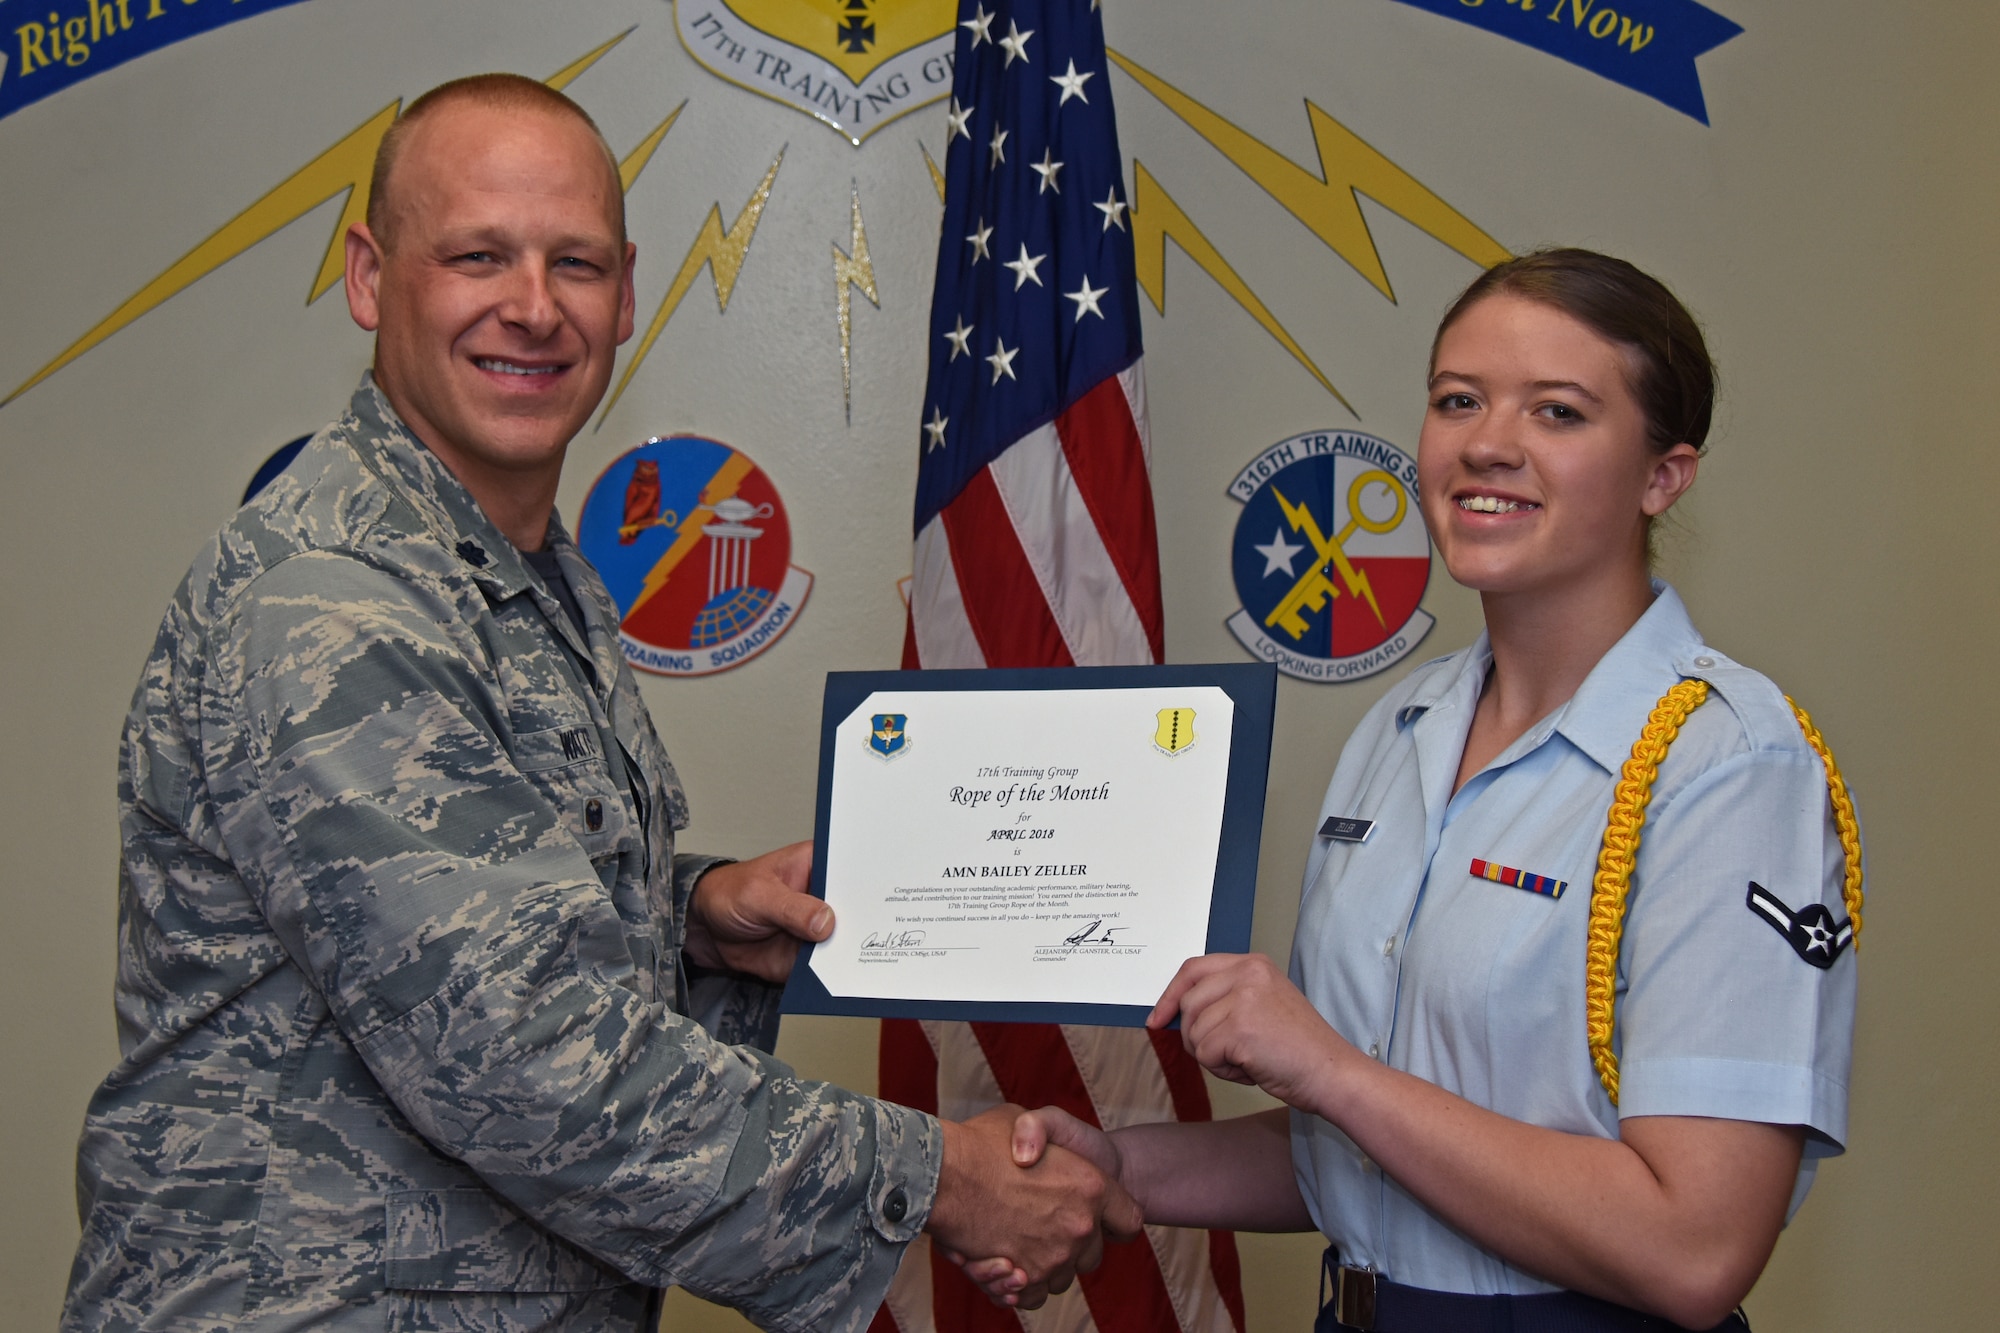 U.S. Air Force Lt. Col. Steven Watts, 17th Training Group deputy commander, presents the 17th TRG Rope of the Month award to Airman Bailey Zeller, 315th Training Squadron trainee, at Brandenburg Hall on Goodfellow Air Force Base, Texas, May 4, 2018. The 315th TRS’s vision is to develop combat-ready intelligence, surveillance and reconnaissance professionals and promote an innovative squadron culture and identity unmatched across the U.S. Air Force. (U.S. Air Force photo by Airman 1st Class Zachary Chapman/Released)